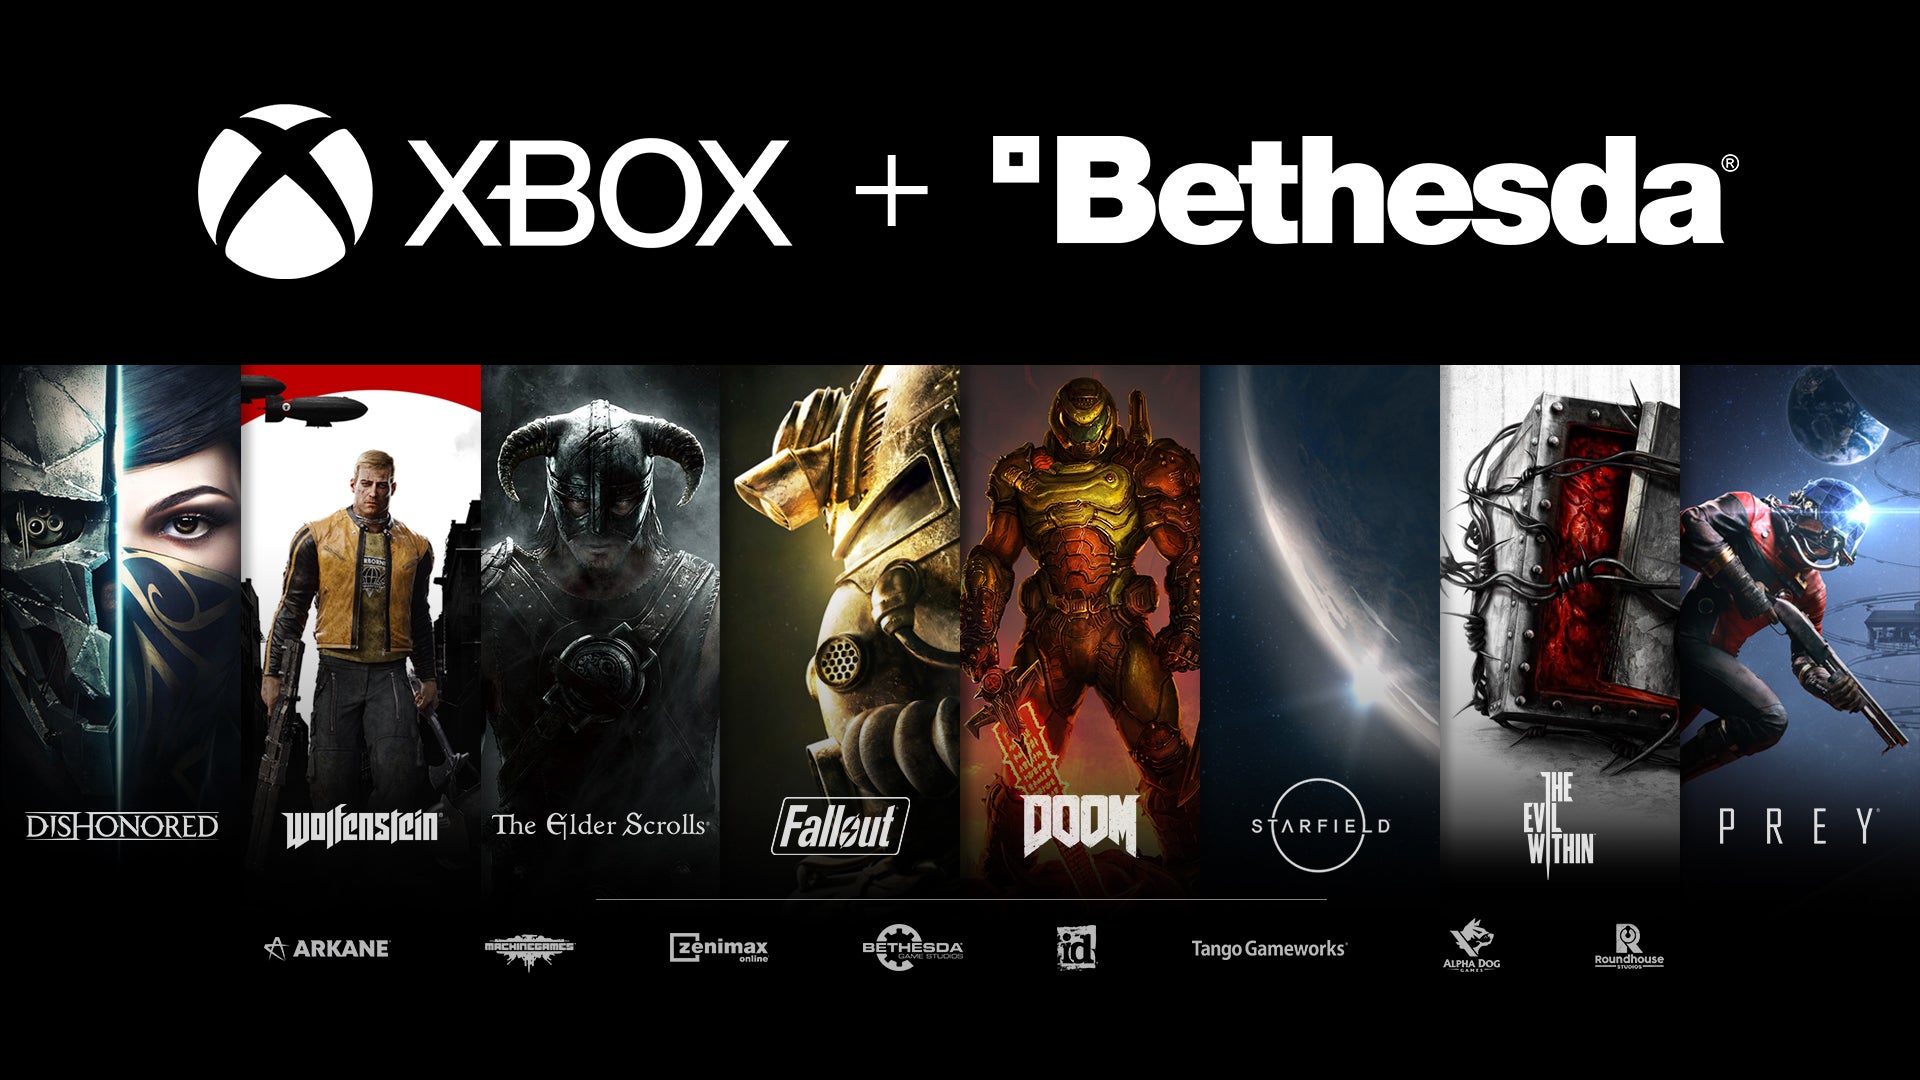 Image for Microsoft's Bethesda acquisition approved by the EU